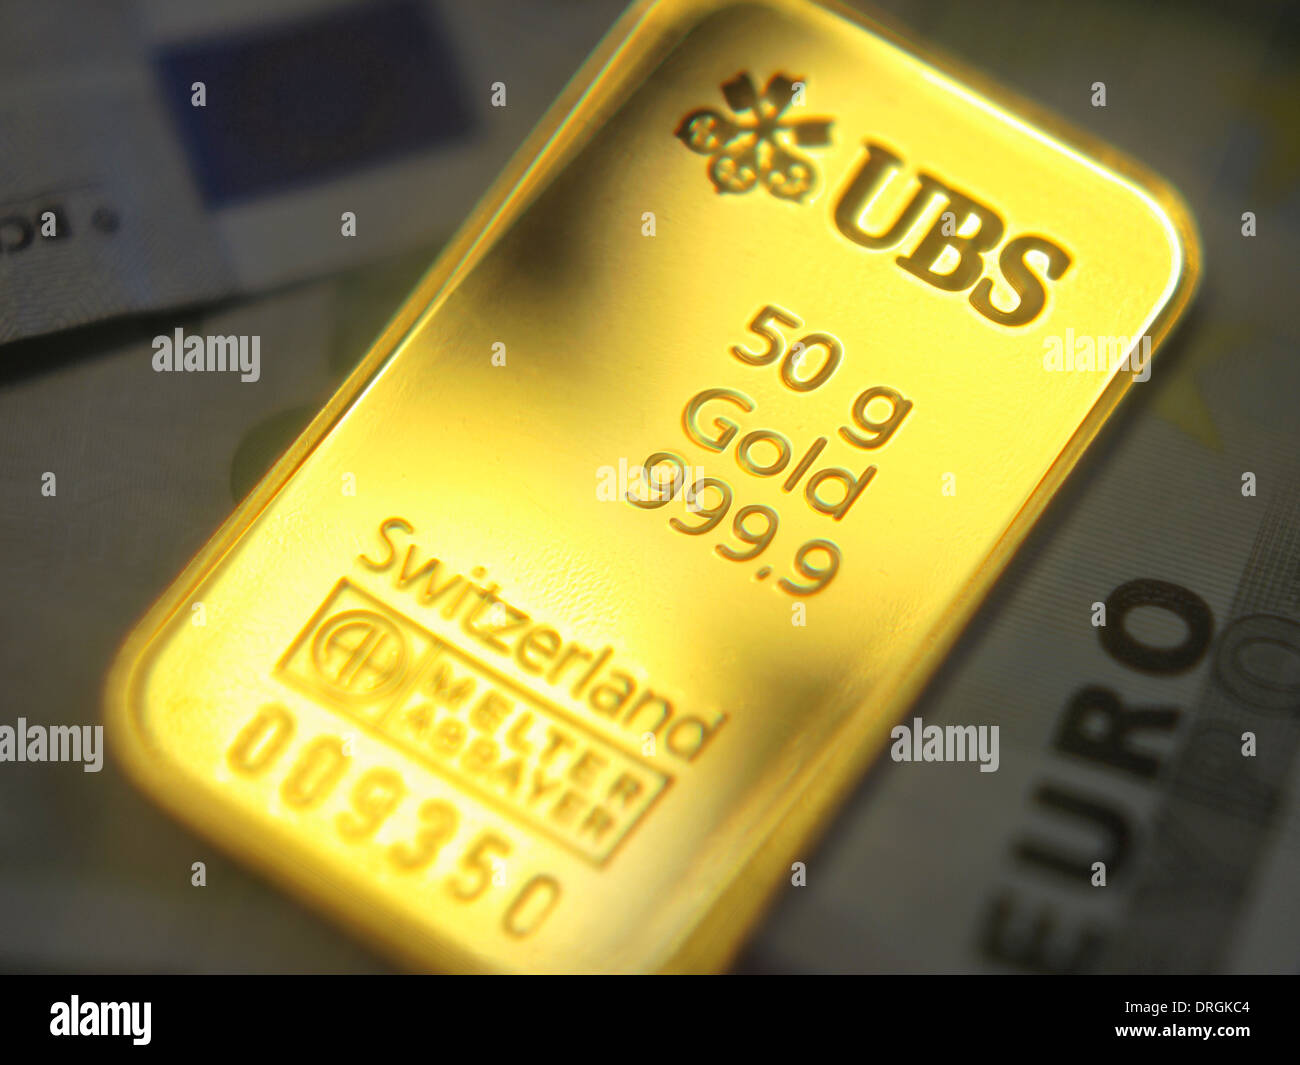 A 50g gold ingot issued by the Swiss bank UBS Stock Photo - Alamy